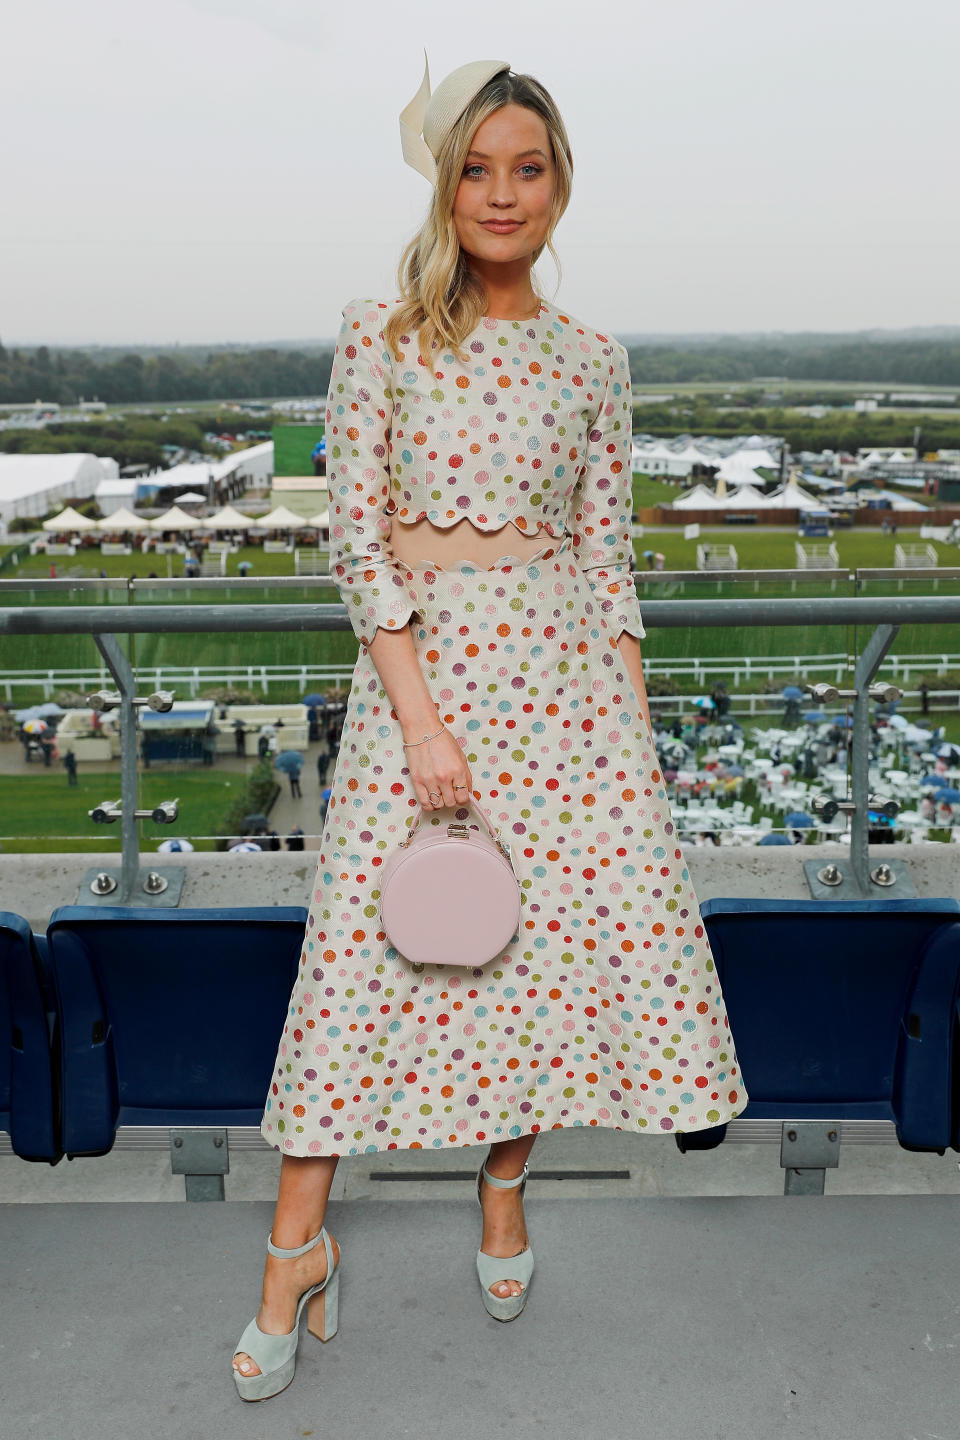 Royal Ascot 2019: Day One